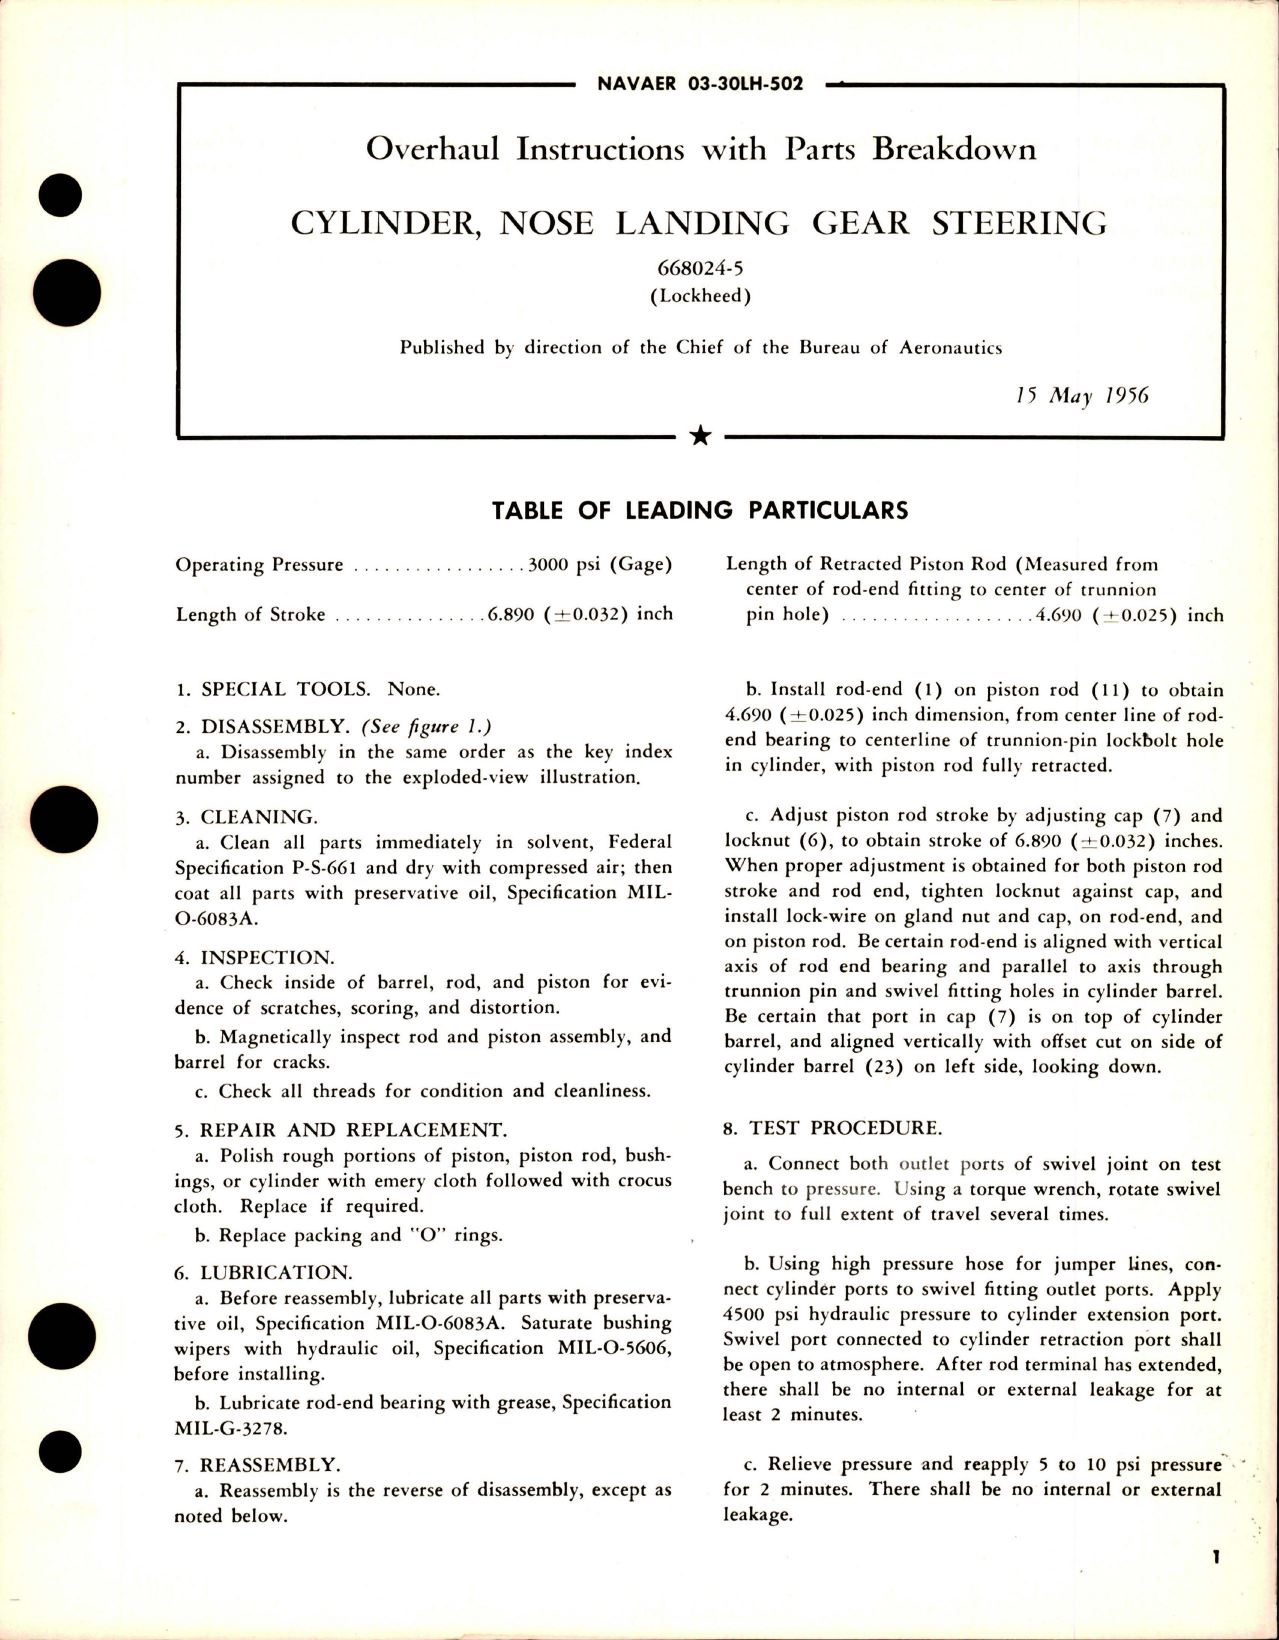 Sample page 1 from AirCorps Library document: Overhaul Instructions with Parts Breakdown for Nose Landing Gear Steering Cylinder - 668024-5